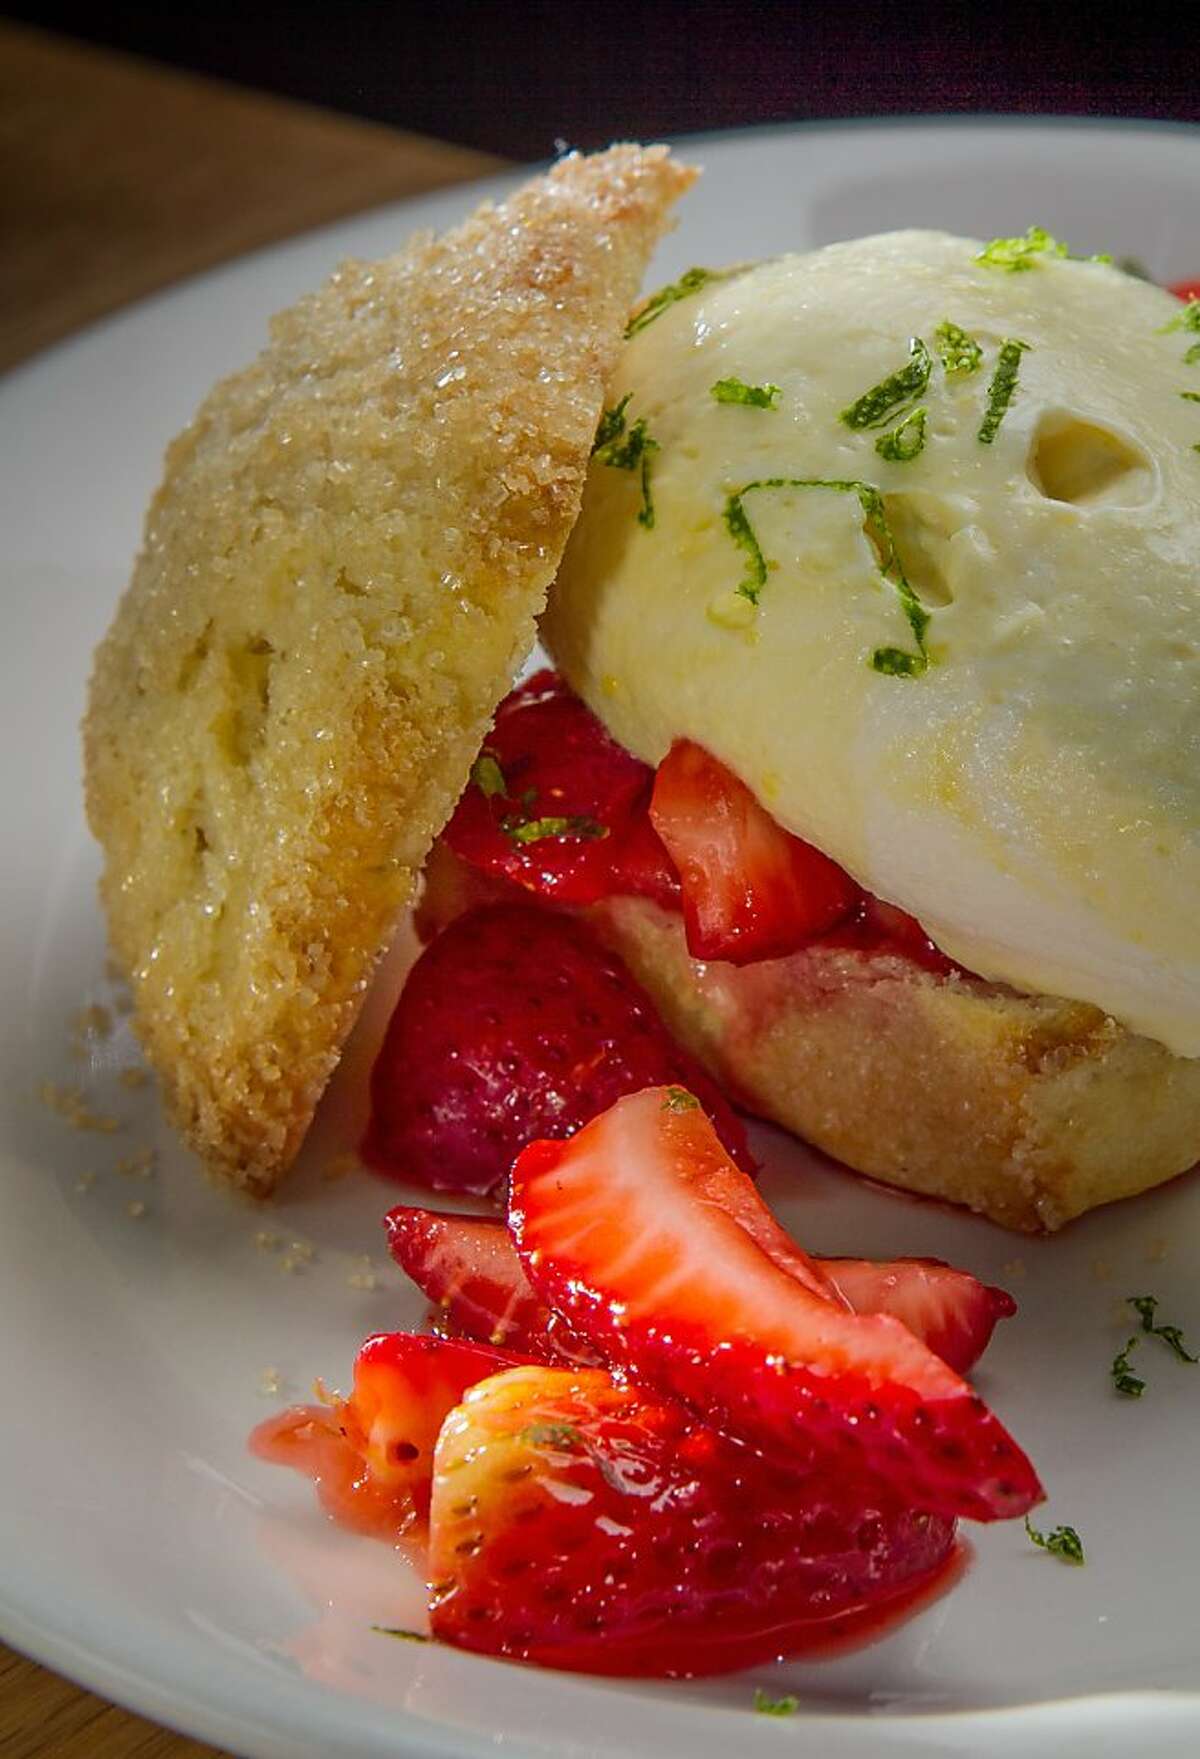 The Strawberry Shortcake at Hi Lo BBQ in San Francisco, Calif., is seen on Thursday, April 4th, 2013.